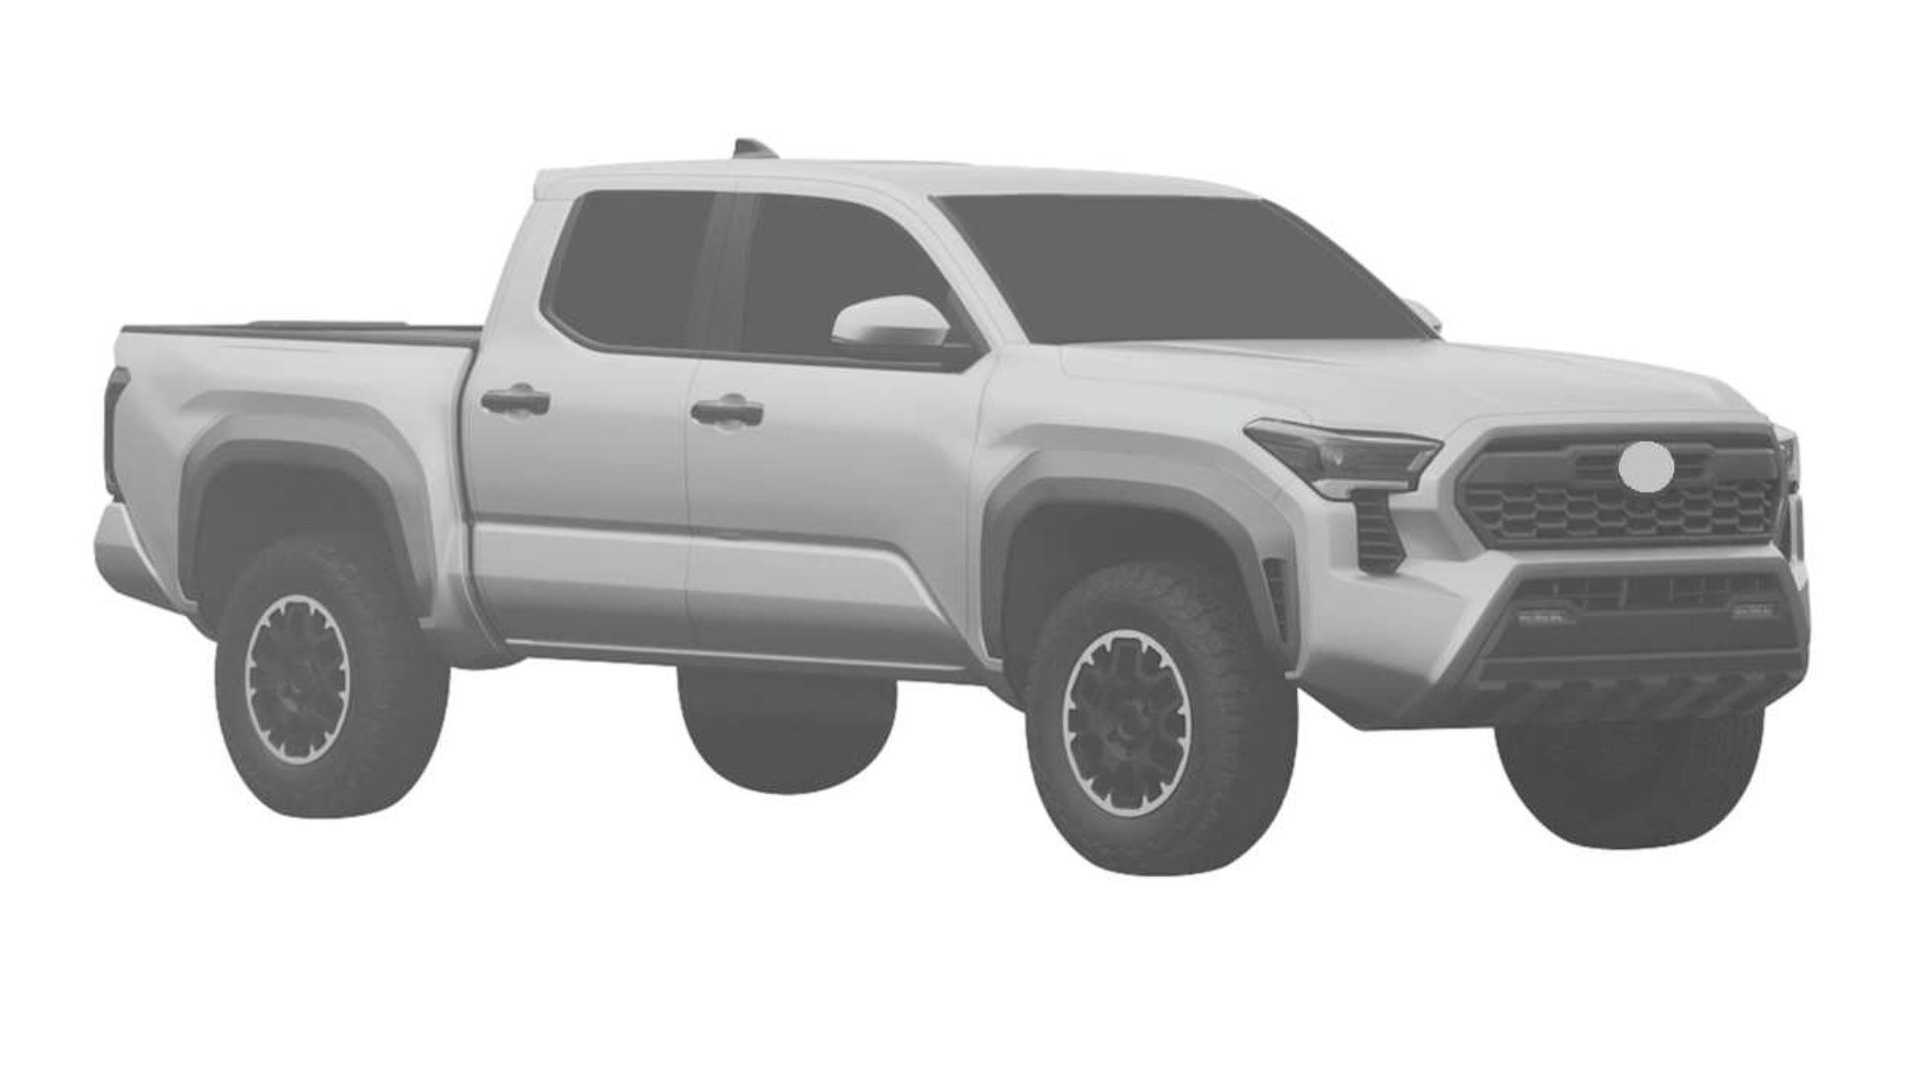 Alleged patent drawing for 2024 Toyota Tacoma - Photo credit: Motor1